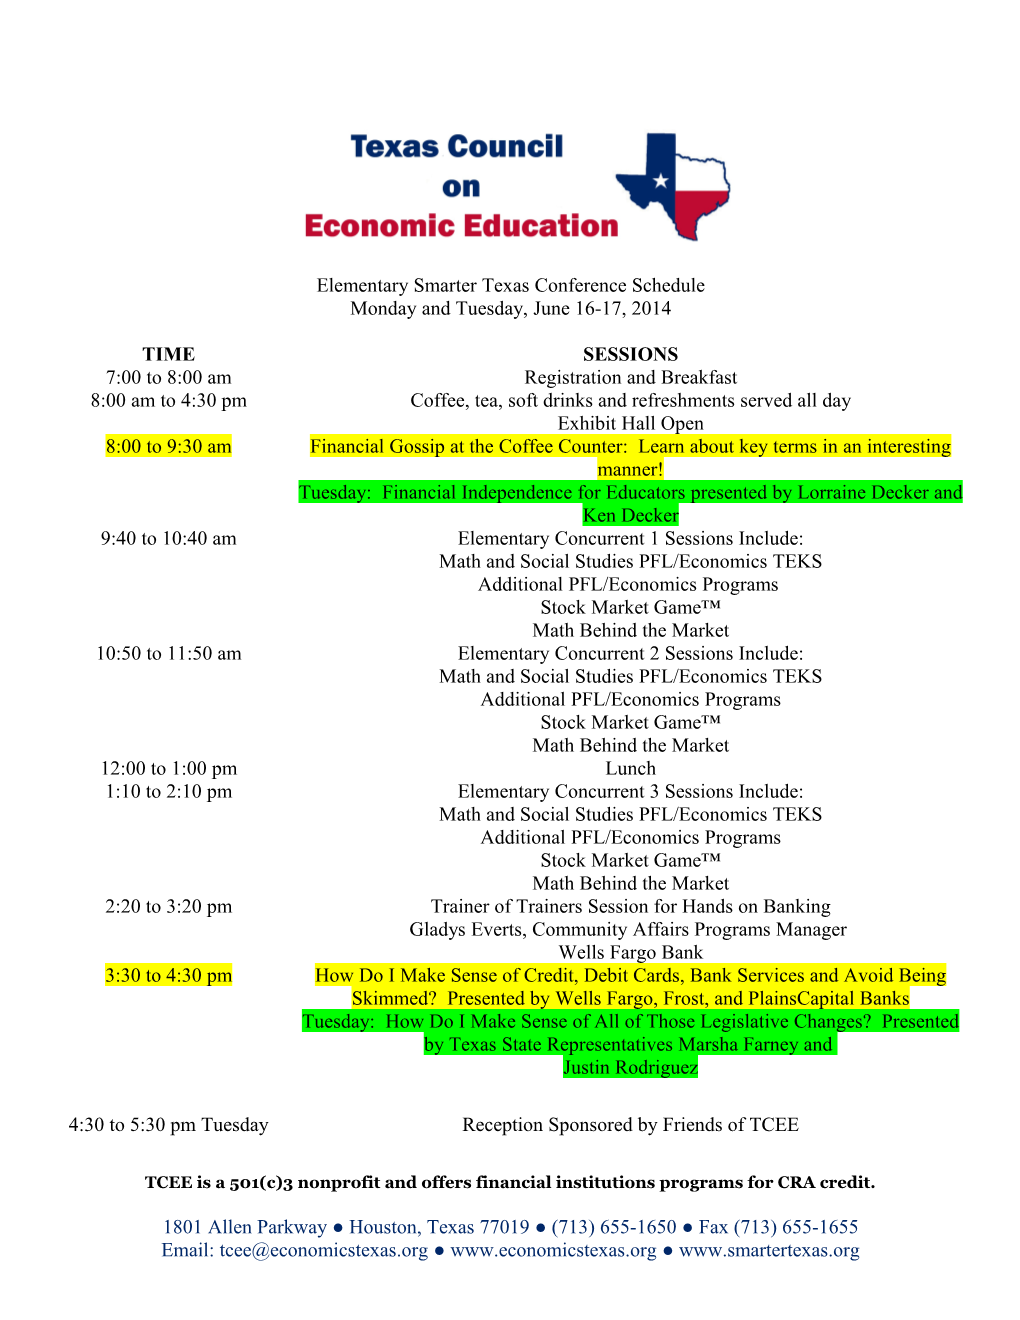 Elementary Smarter Texas Conference Schedule